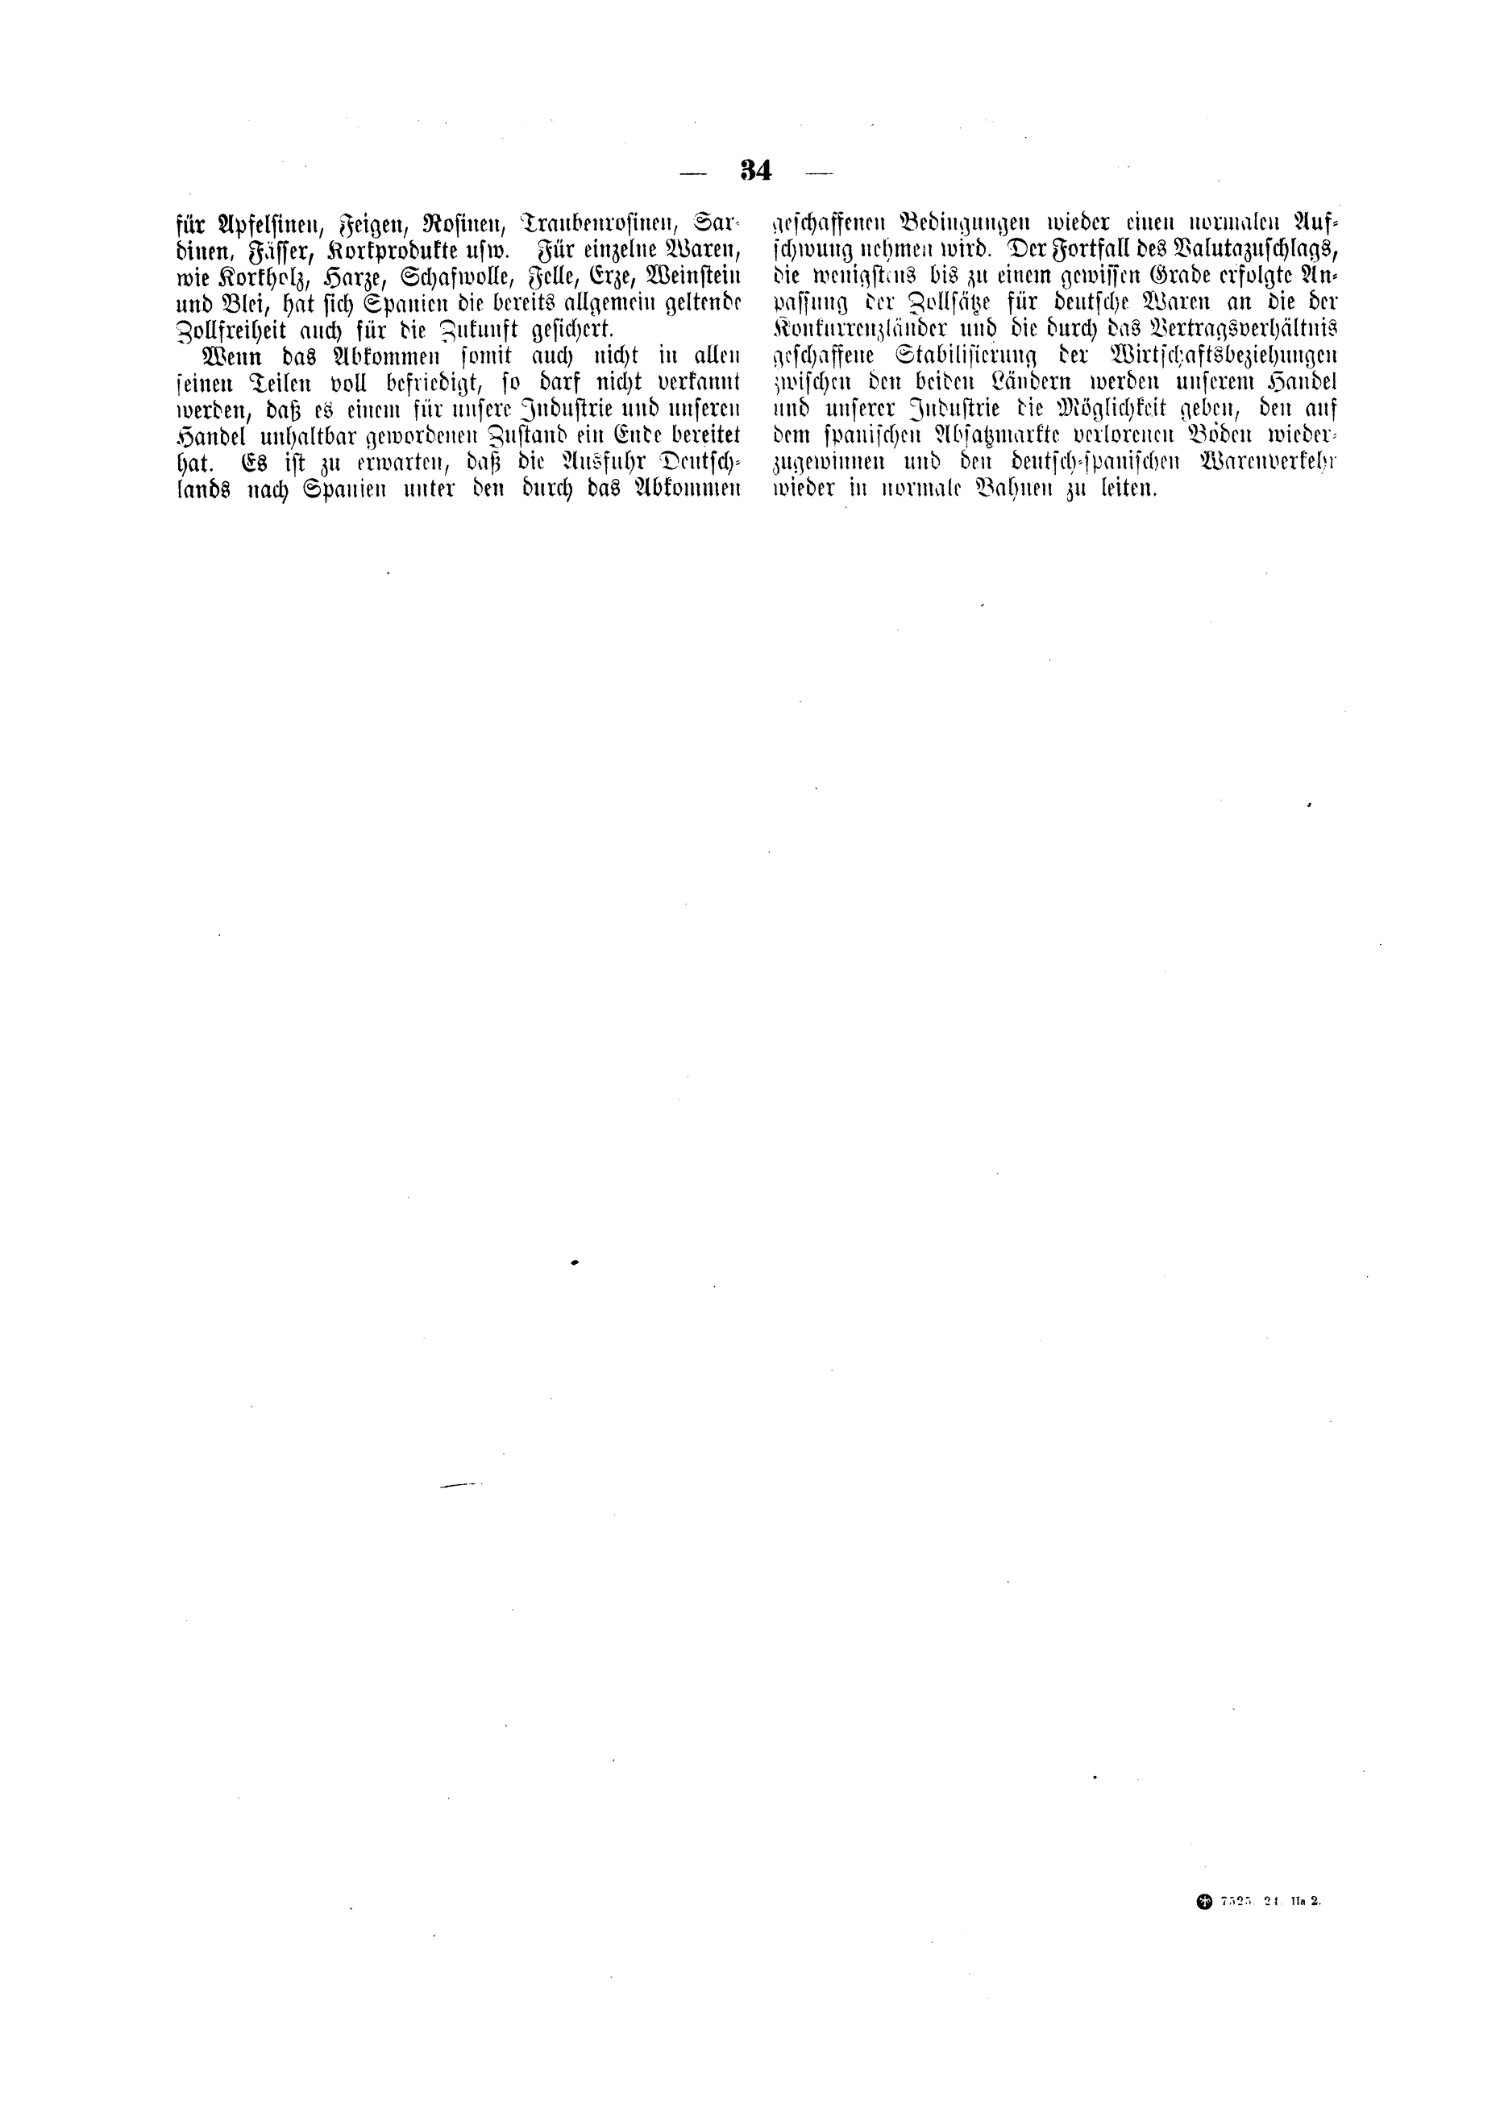 Scan of page 34